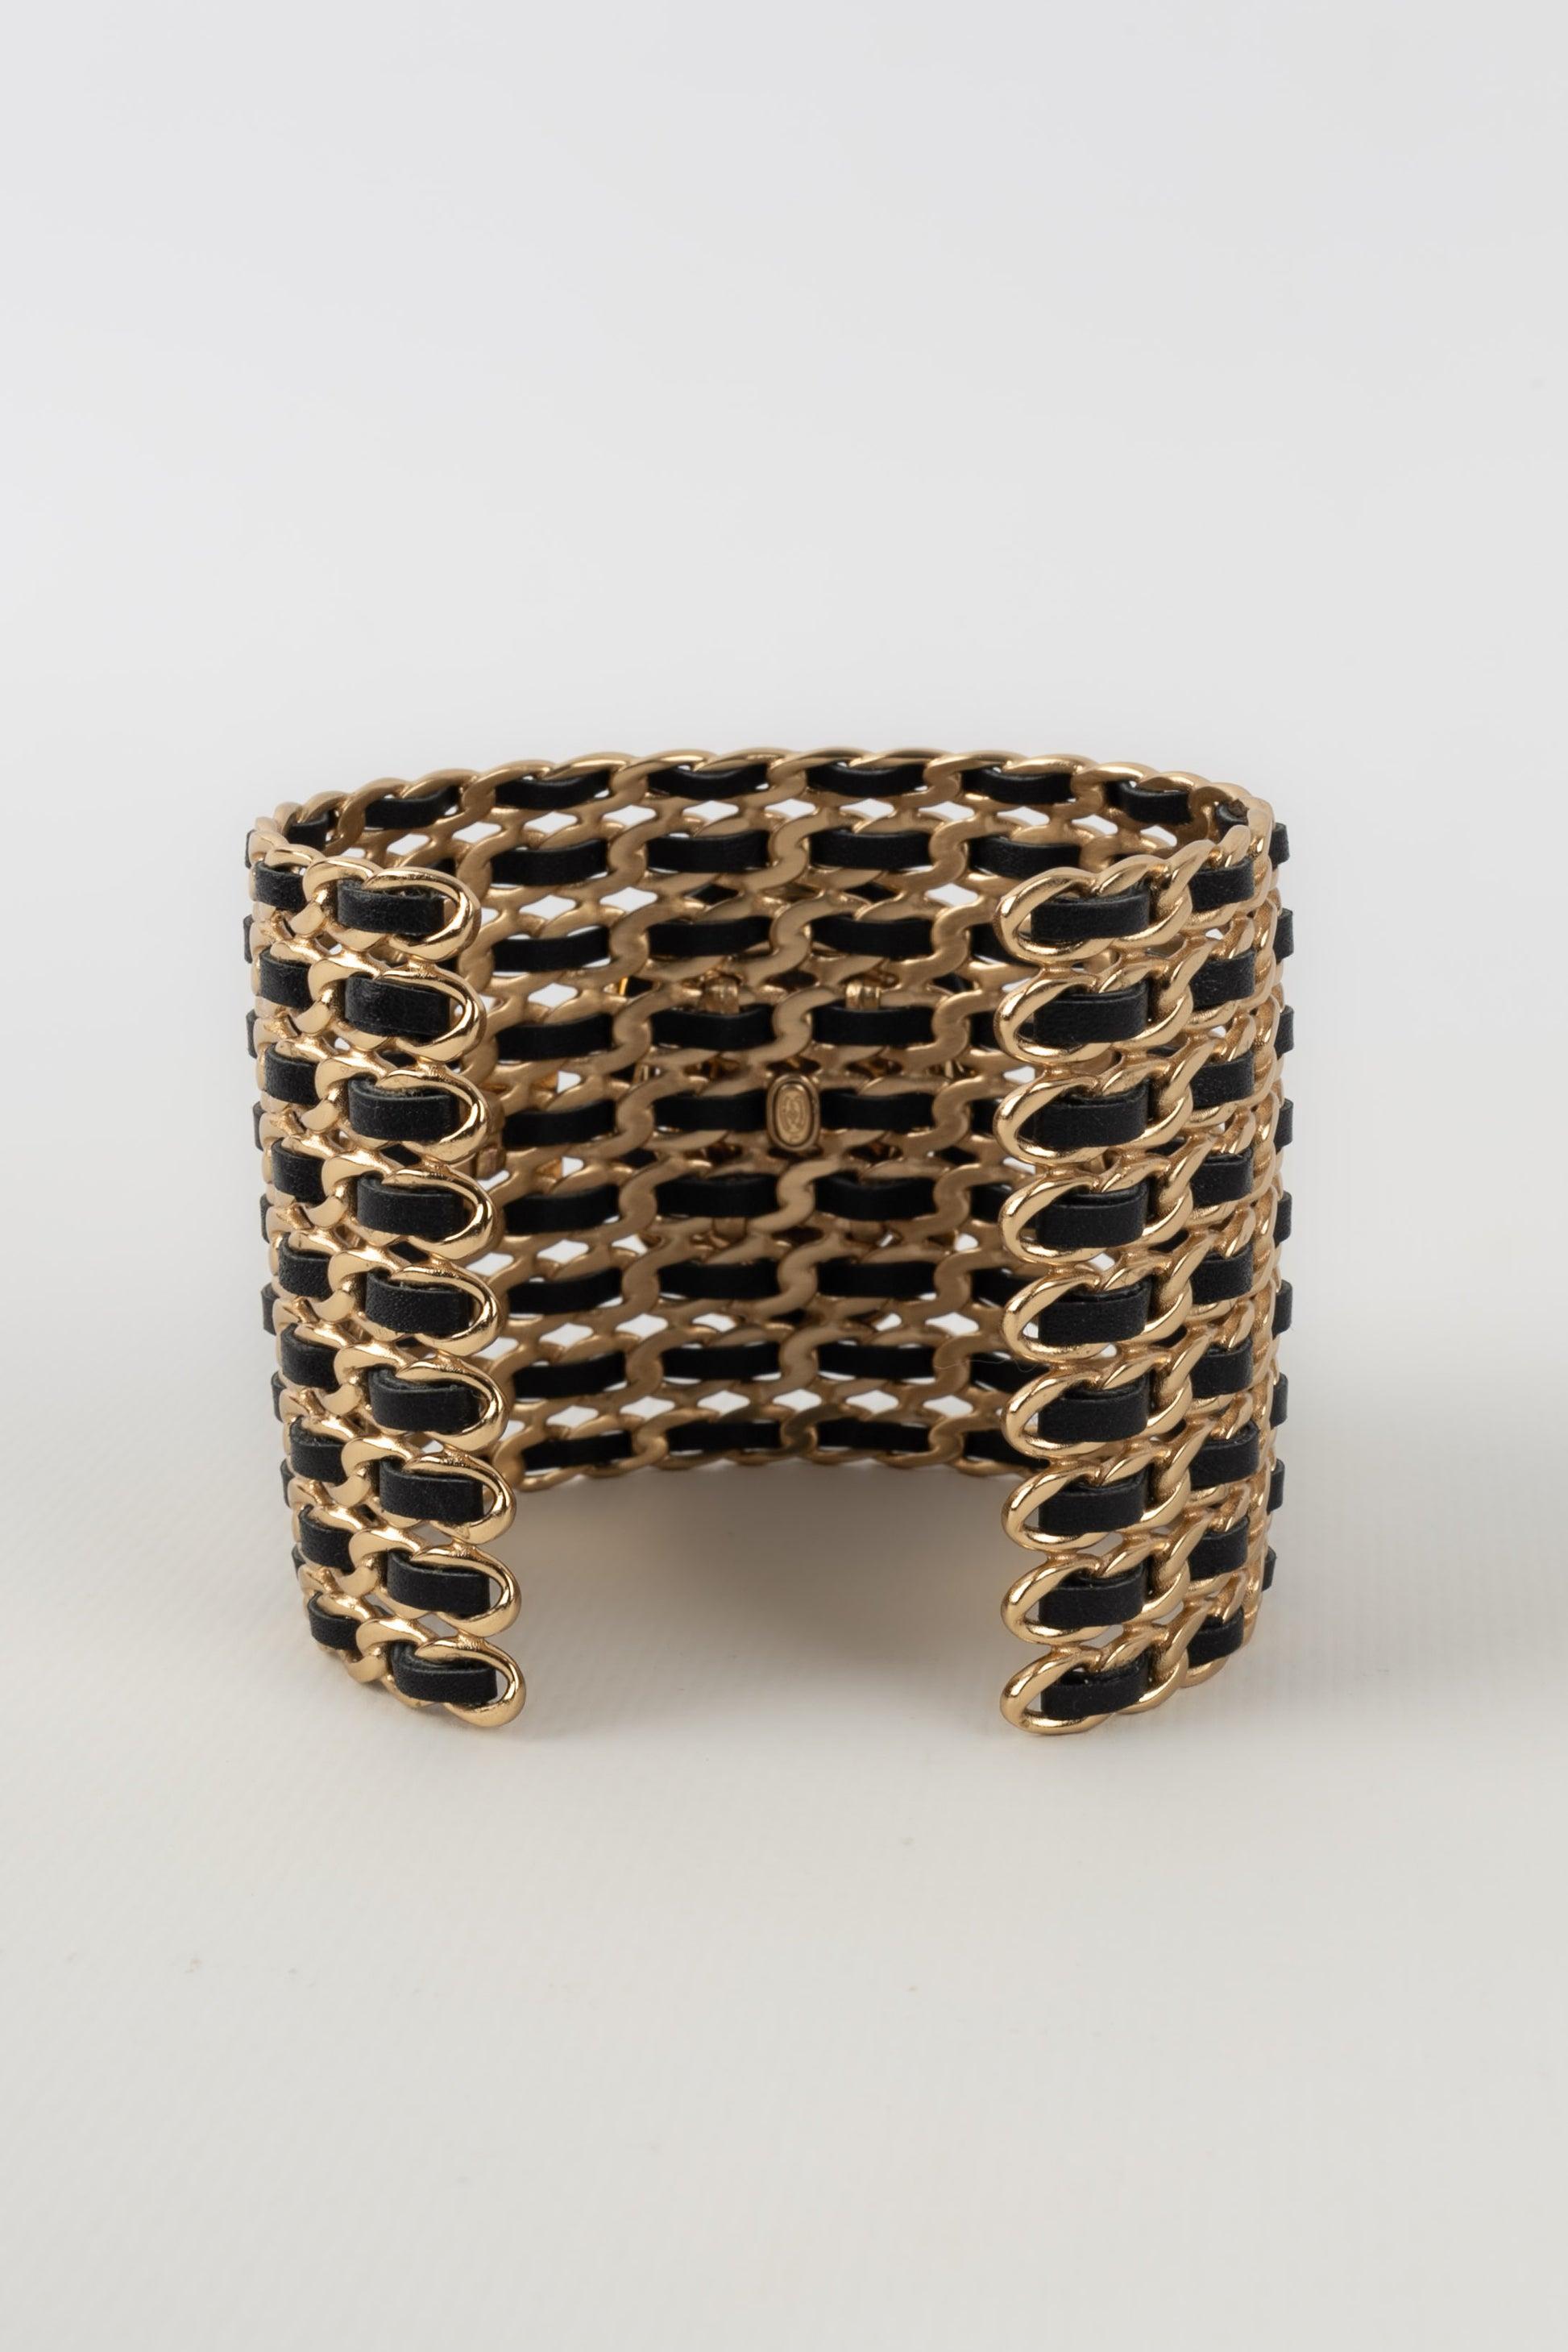 Chanel - (Made in France) Golden metal cuff bracelet interlaced with black leather and topped with an impressive transparent rhinestone. 2022 Collection.

Additional information:
Condition: Very good condition
Dimensions: Length: 15 cm - Opening: 3